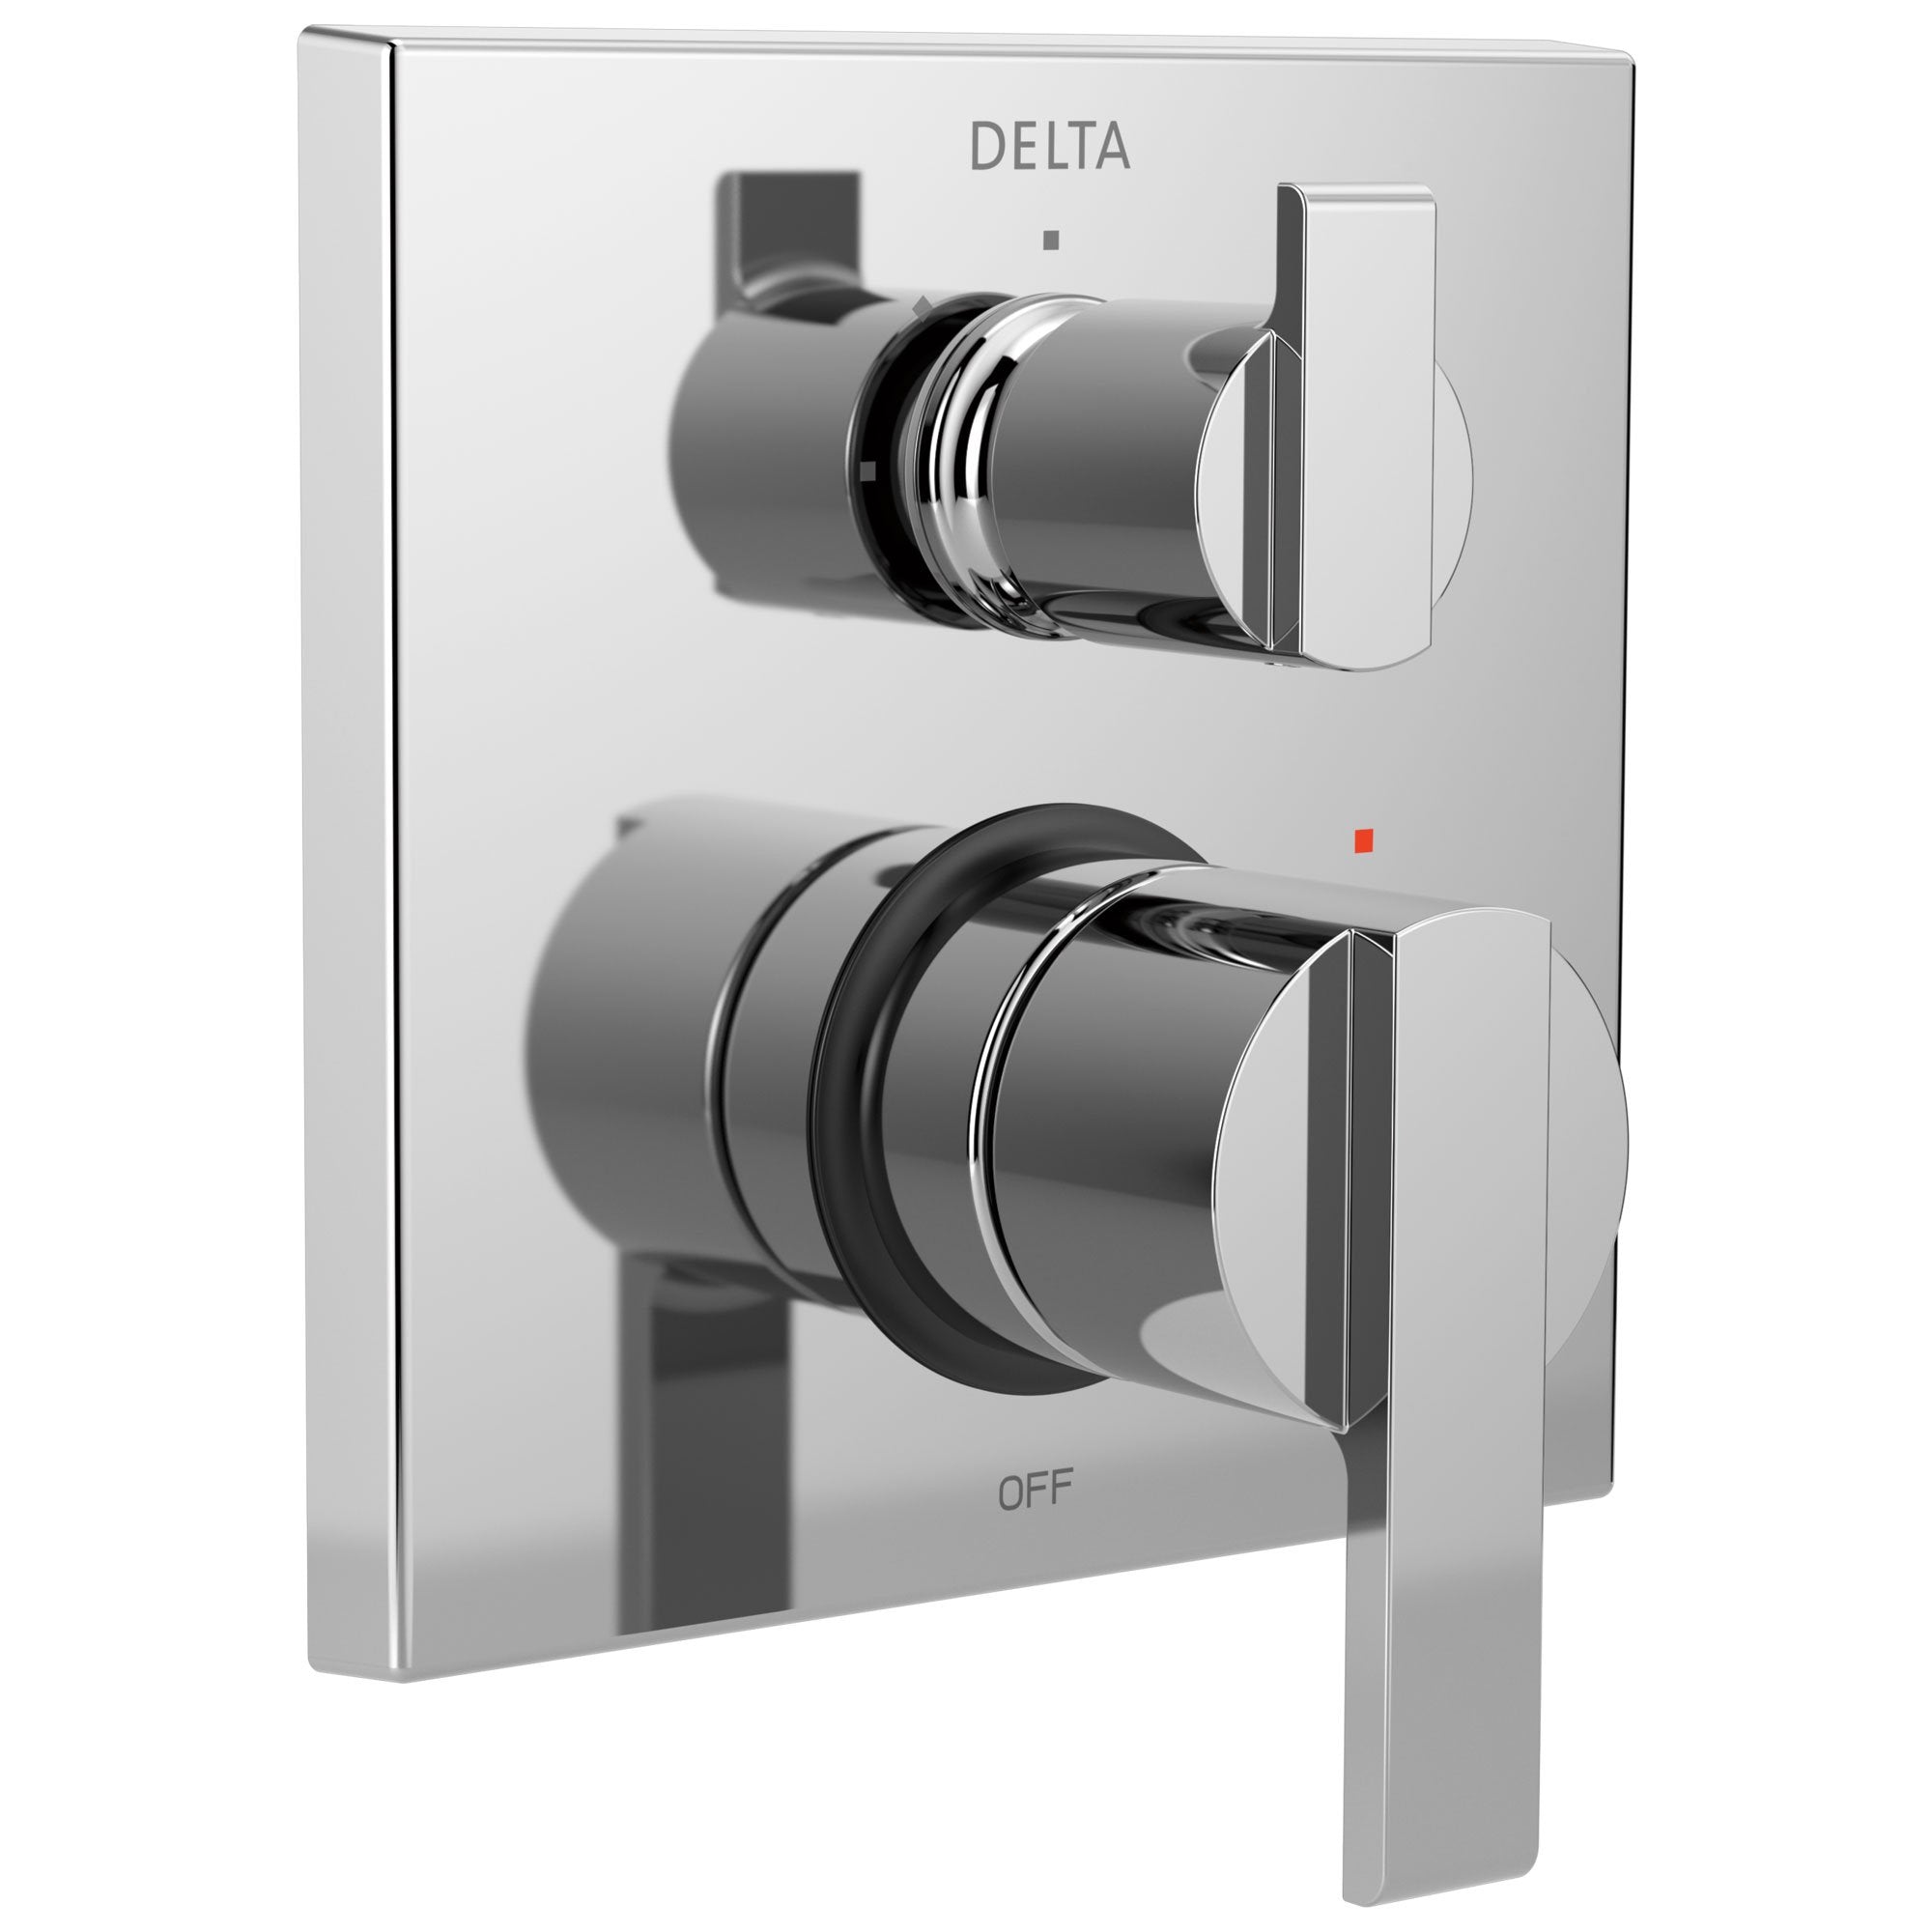 Delta Ara Chrome Modern Monitor 14 Shower Faucet Valve Trim Control Handle with 3-Setting Integrated Diverter Includes Trim Kit and Valve without Stops D2212V